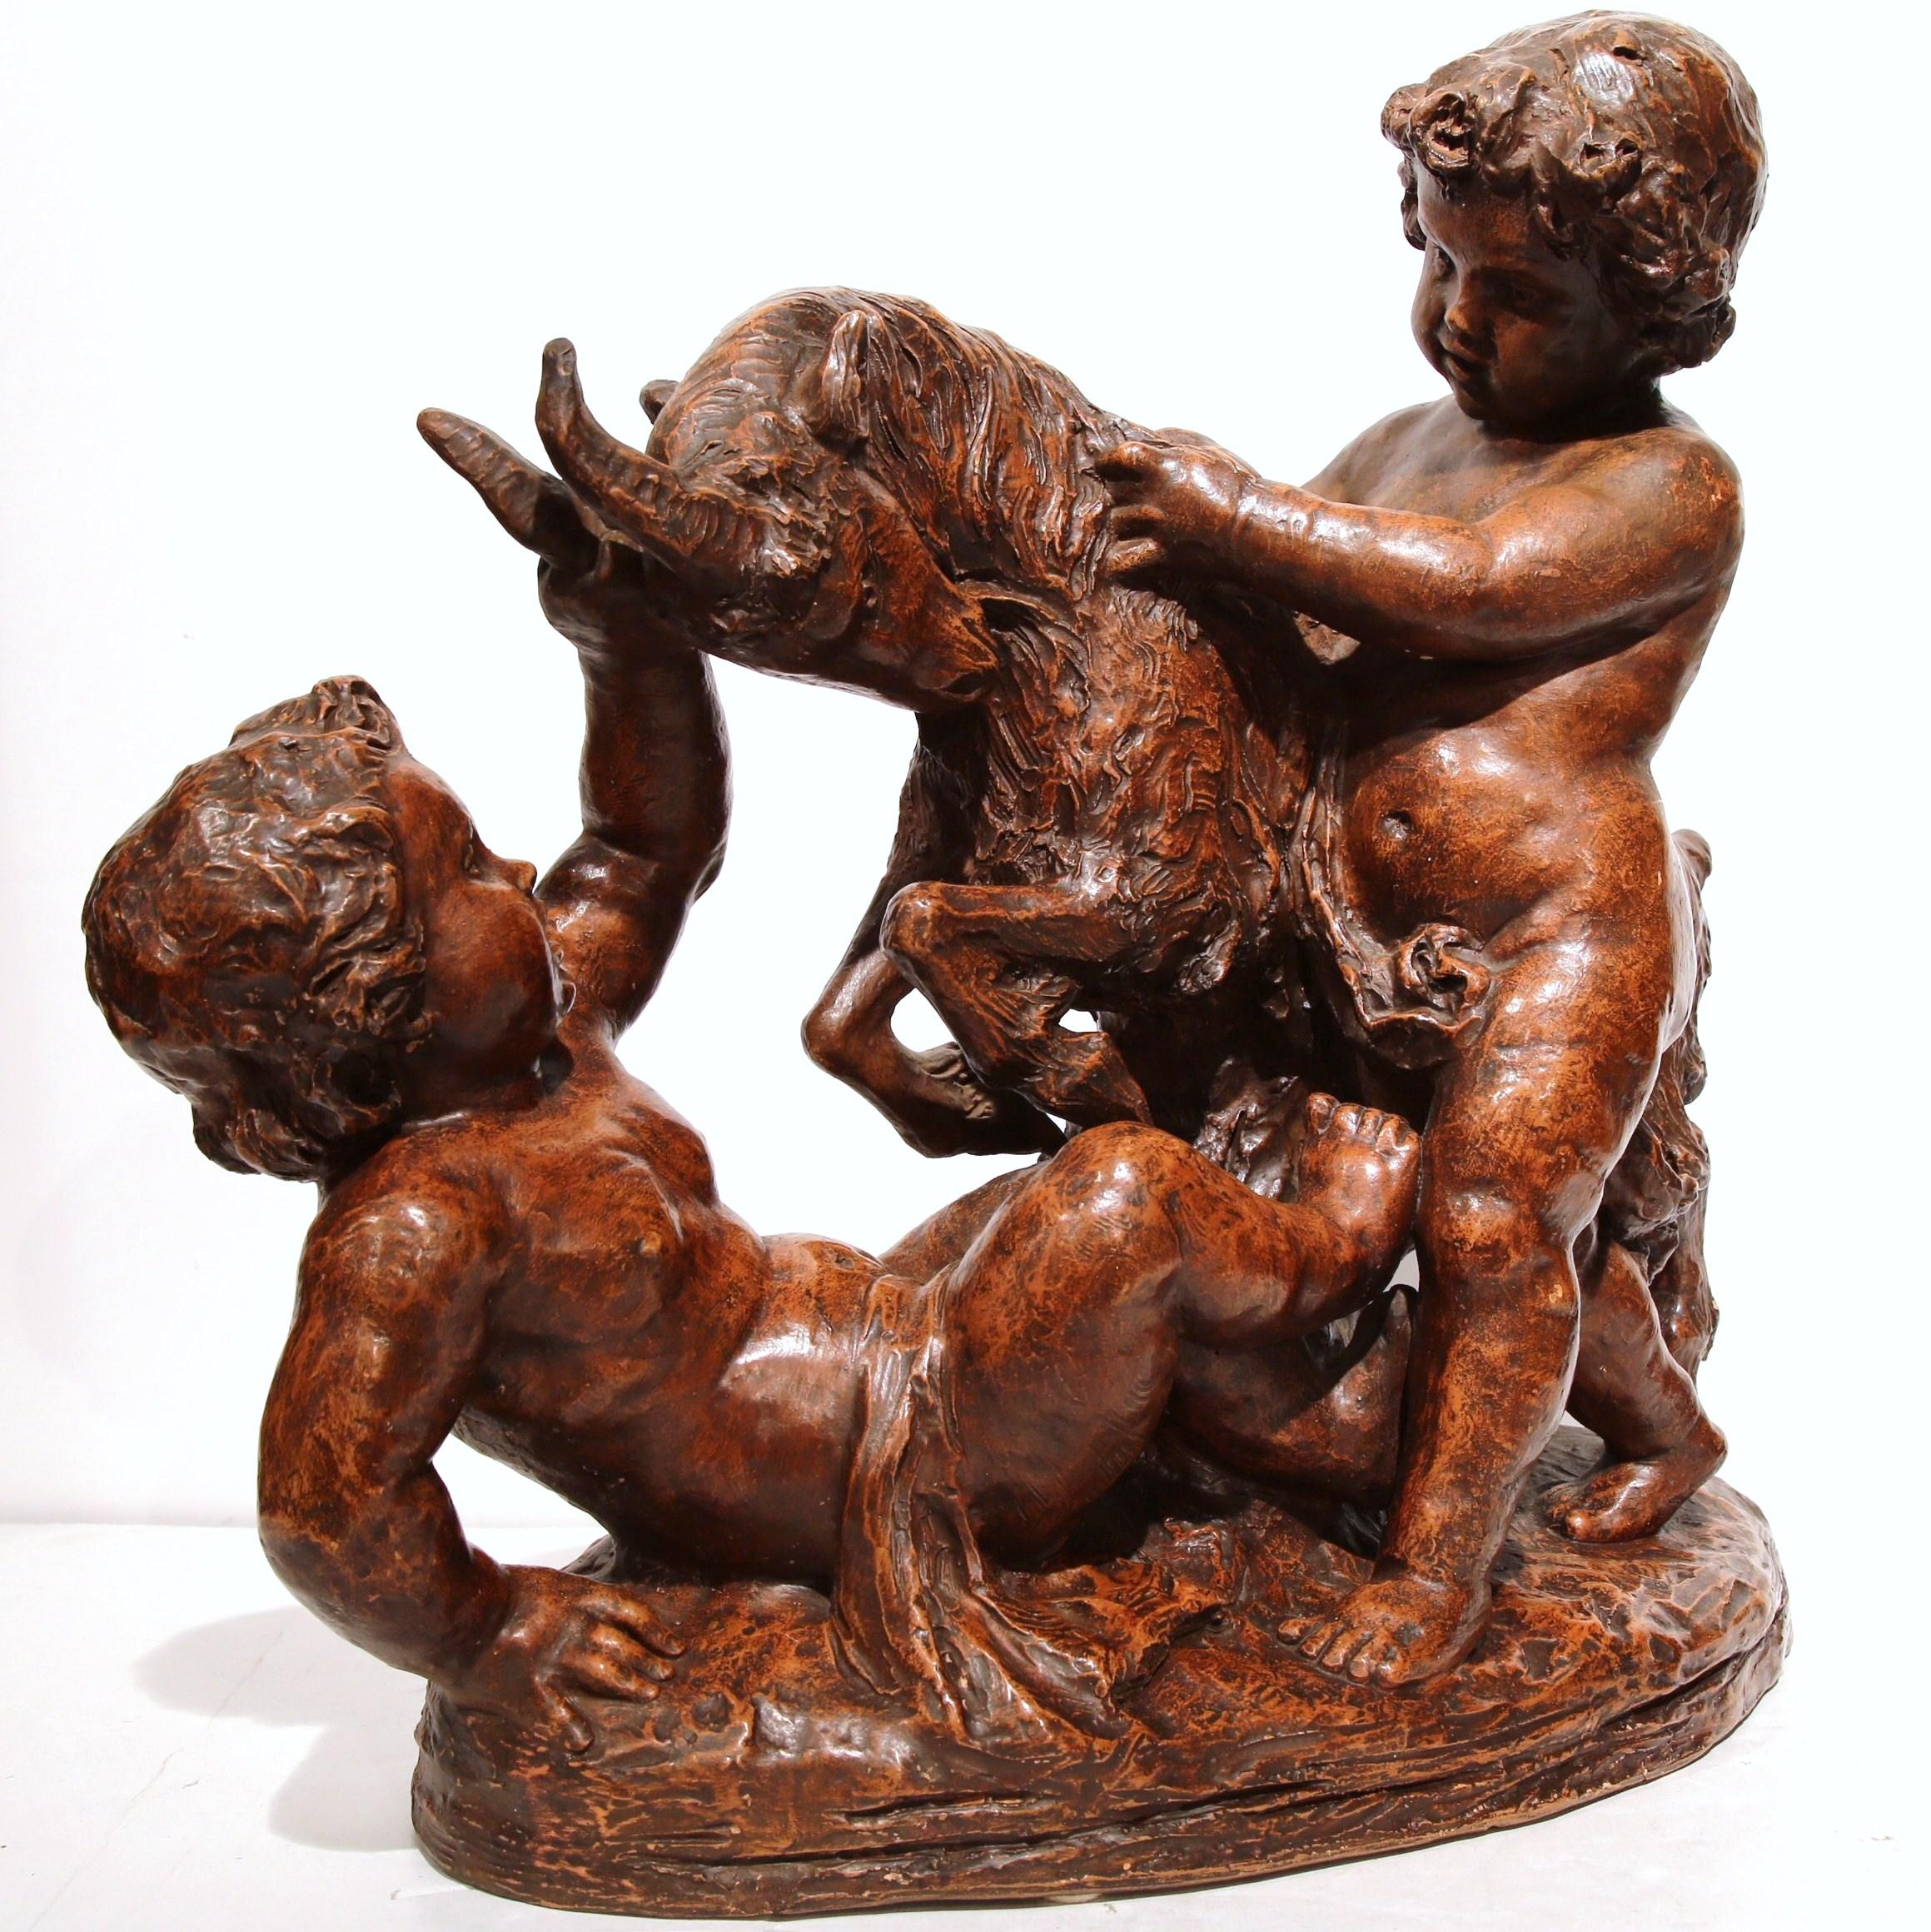 This large, charming, antique clay cherub composition was sculpted in France, circa 1880. The sculpture depicts two angelic children playing with a goat; the cherubs are nicely carved with detailed facial expressions and movement. The art work is